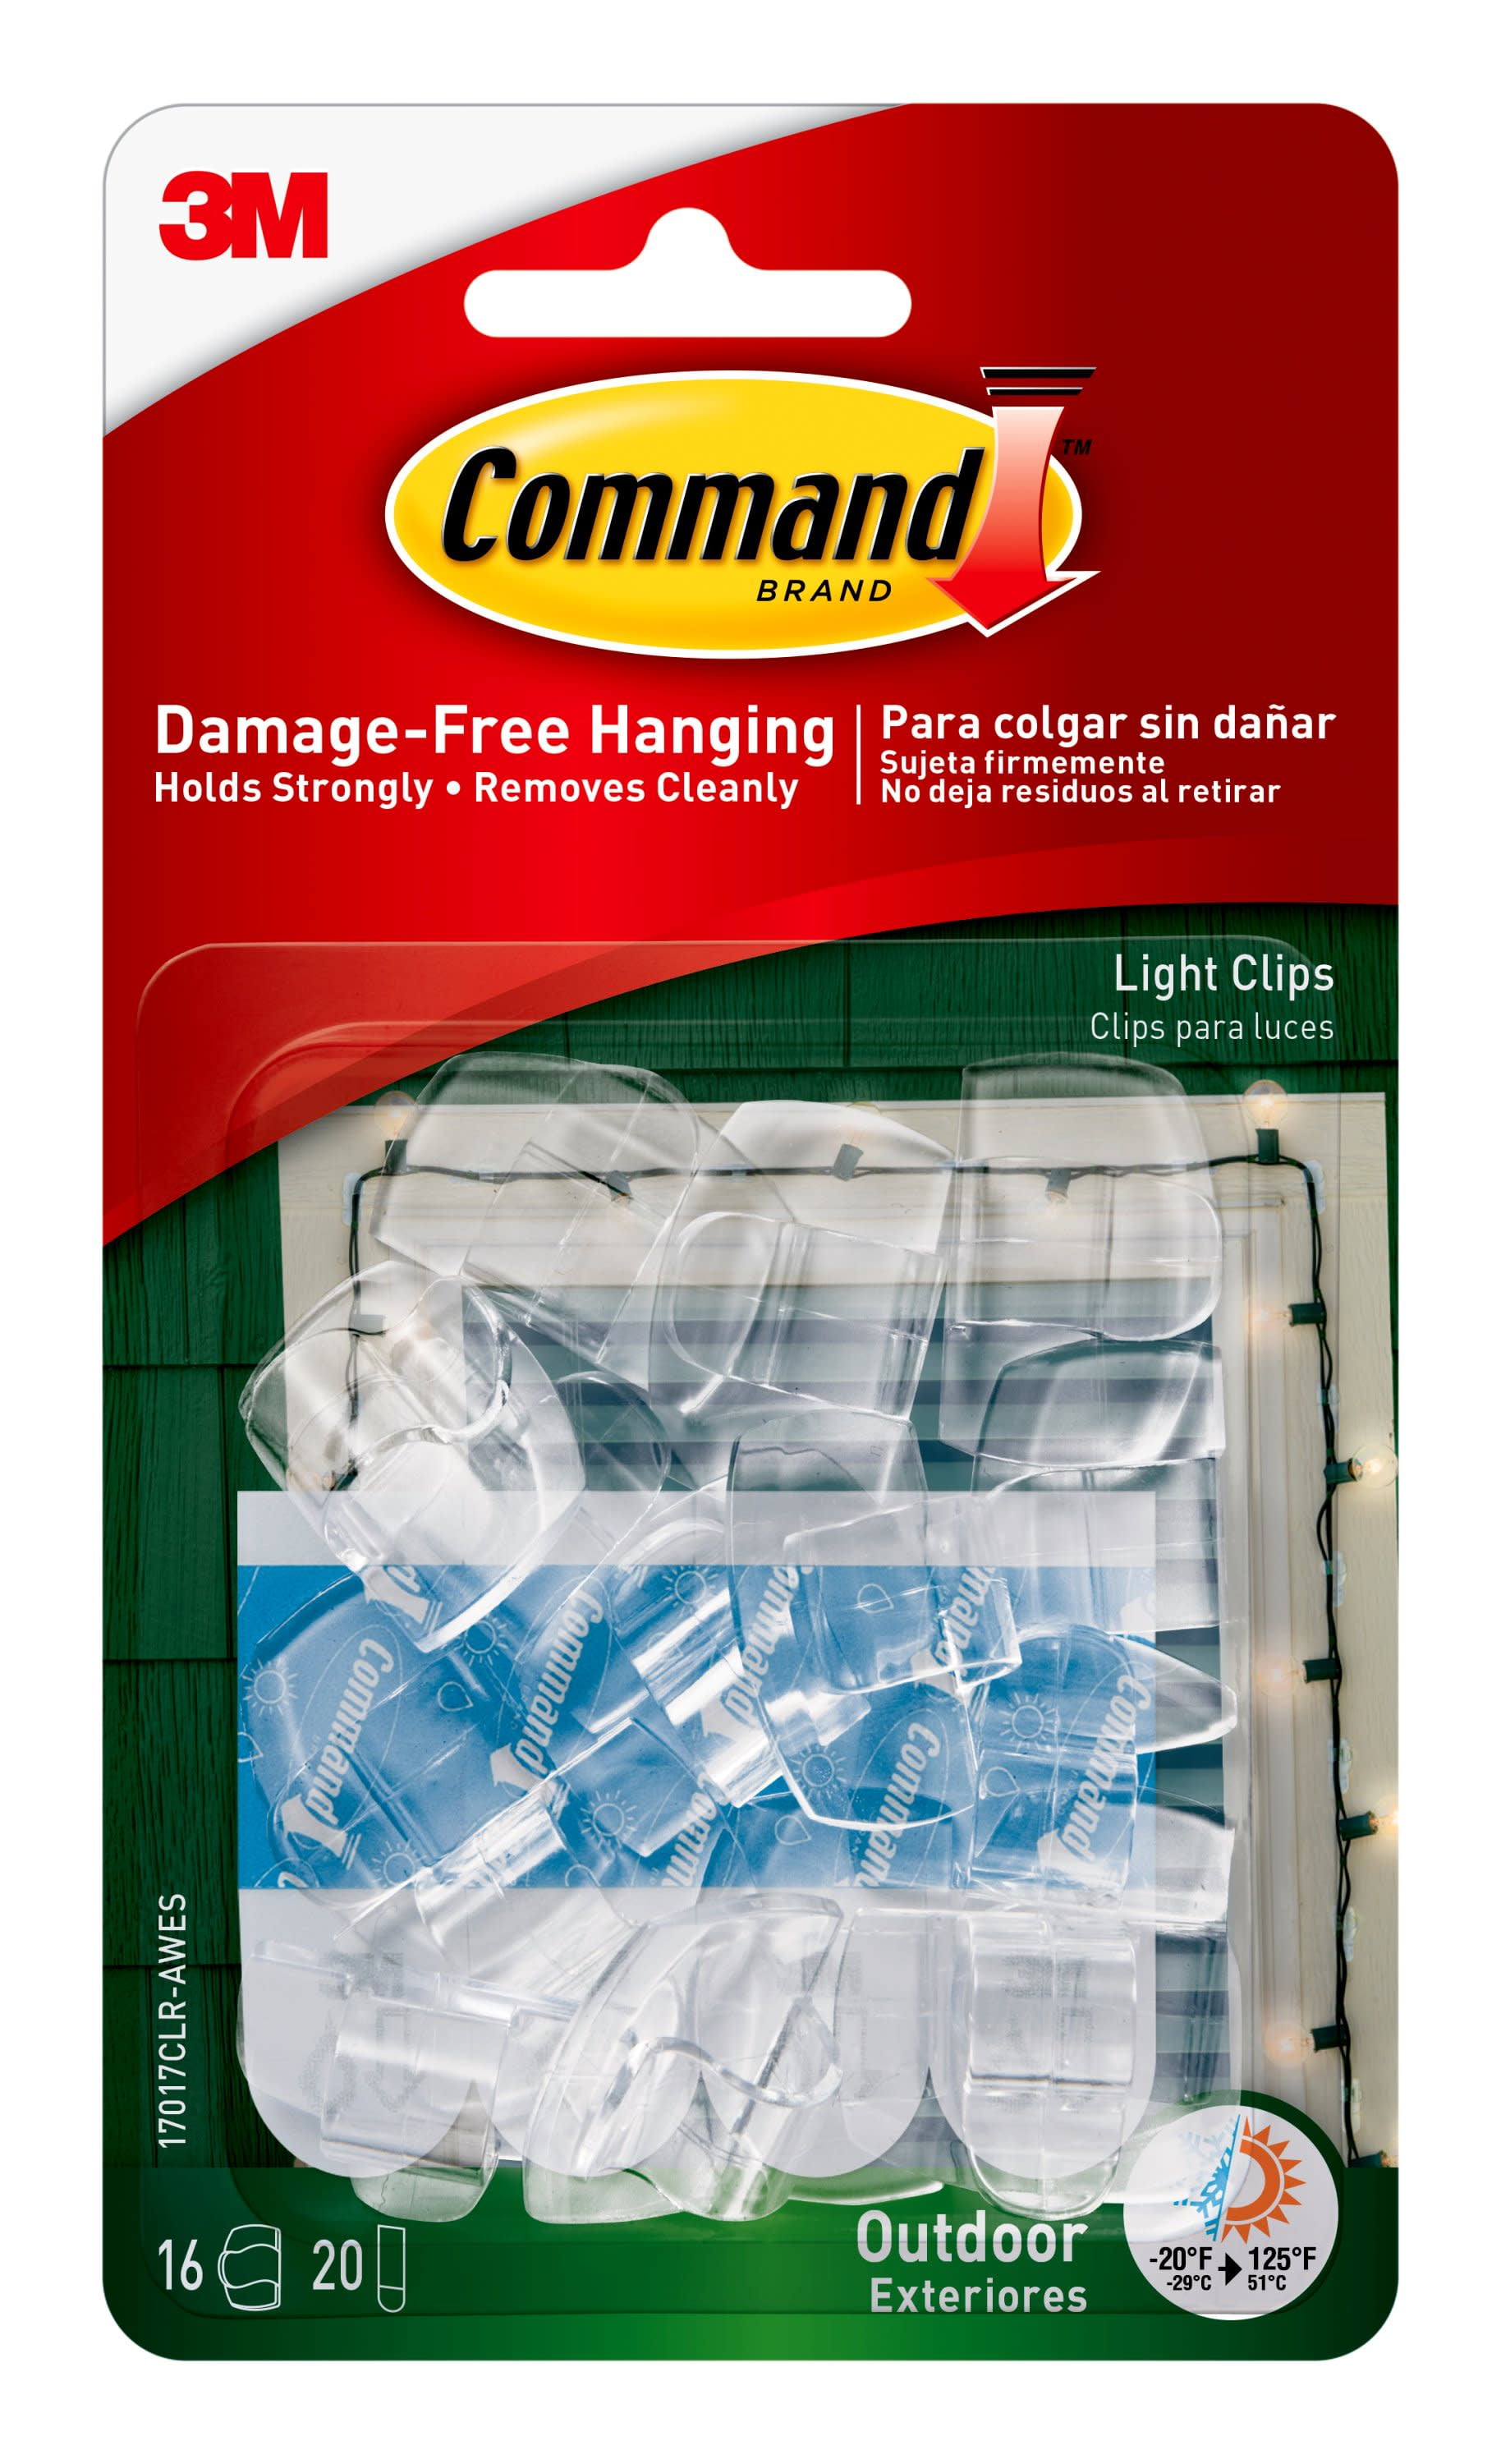 Save on Command Brand Outdoor Exteriores Medium Black Damage-Free Hanging  Hooks Order Online Delivery